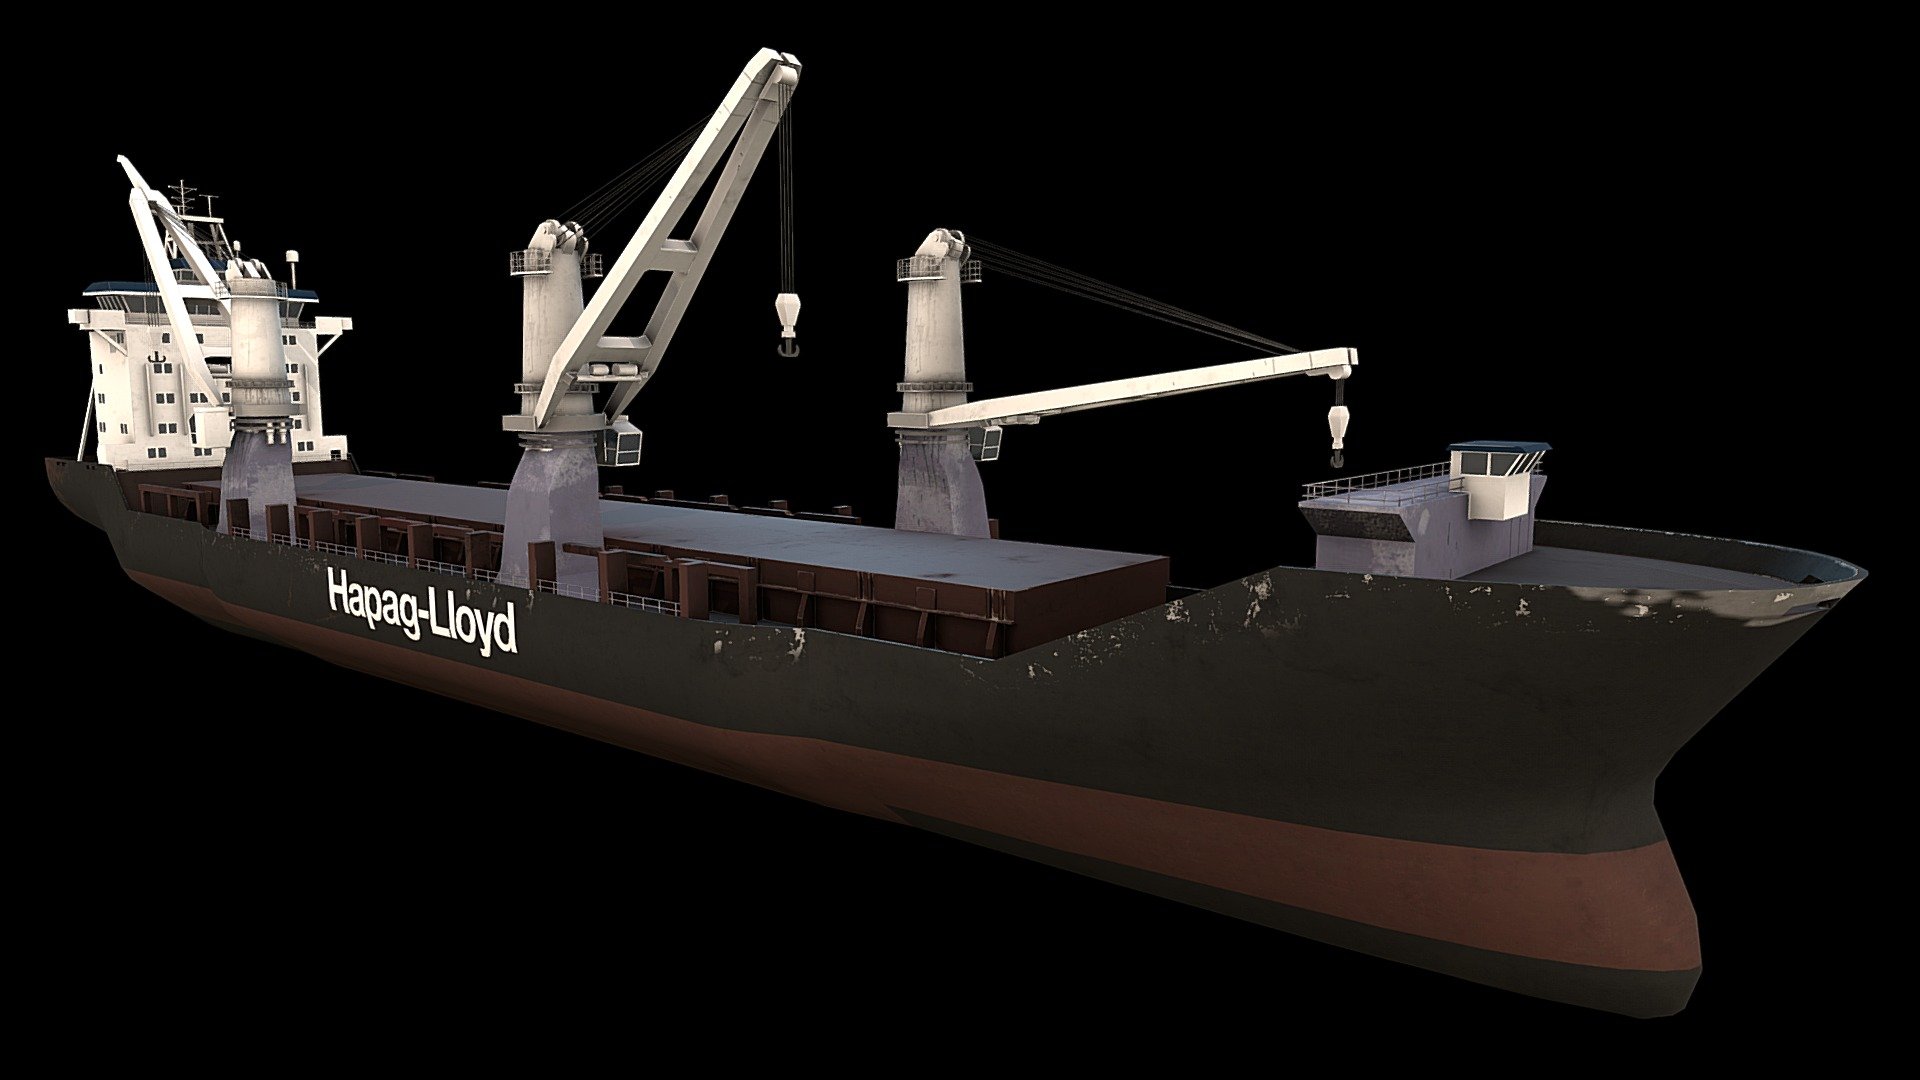 Heavy Lift Multi Purpose Cargo Ship Hapag-Lloyd

Additional file contains: 8 x textures in native 4K: 2 x base diffuse and 2 x specular diffuse (with gently baked in AO), 2 x gloss, 2 x norm, 1 x 1K base for windows glass. Contained are also the file formats .fbx, .obj, .3ds and .max (native 2014) 3d model